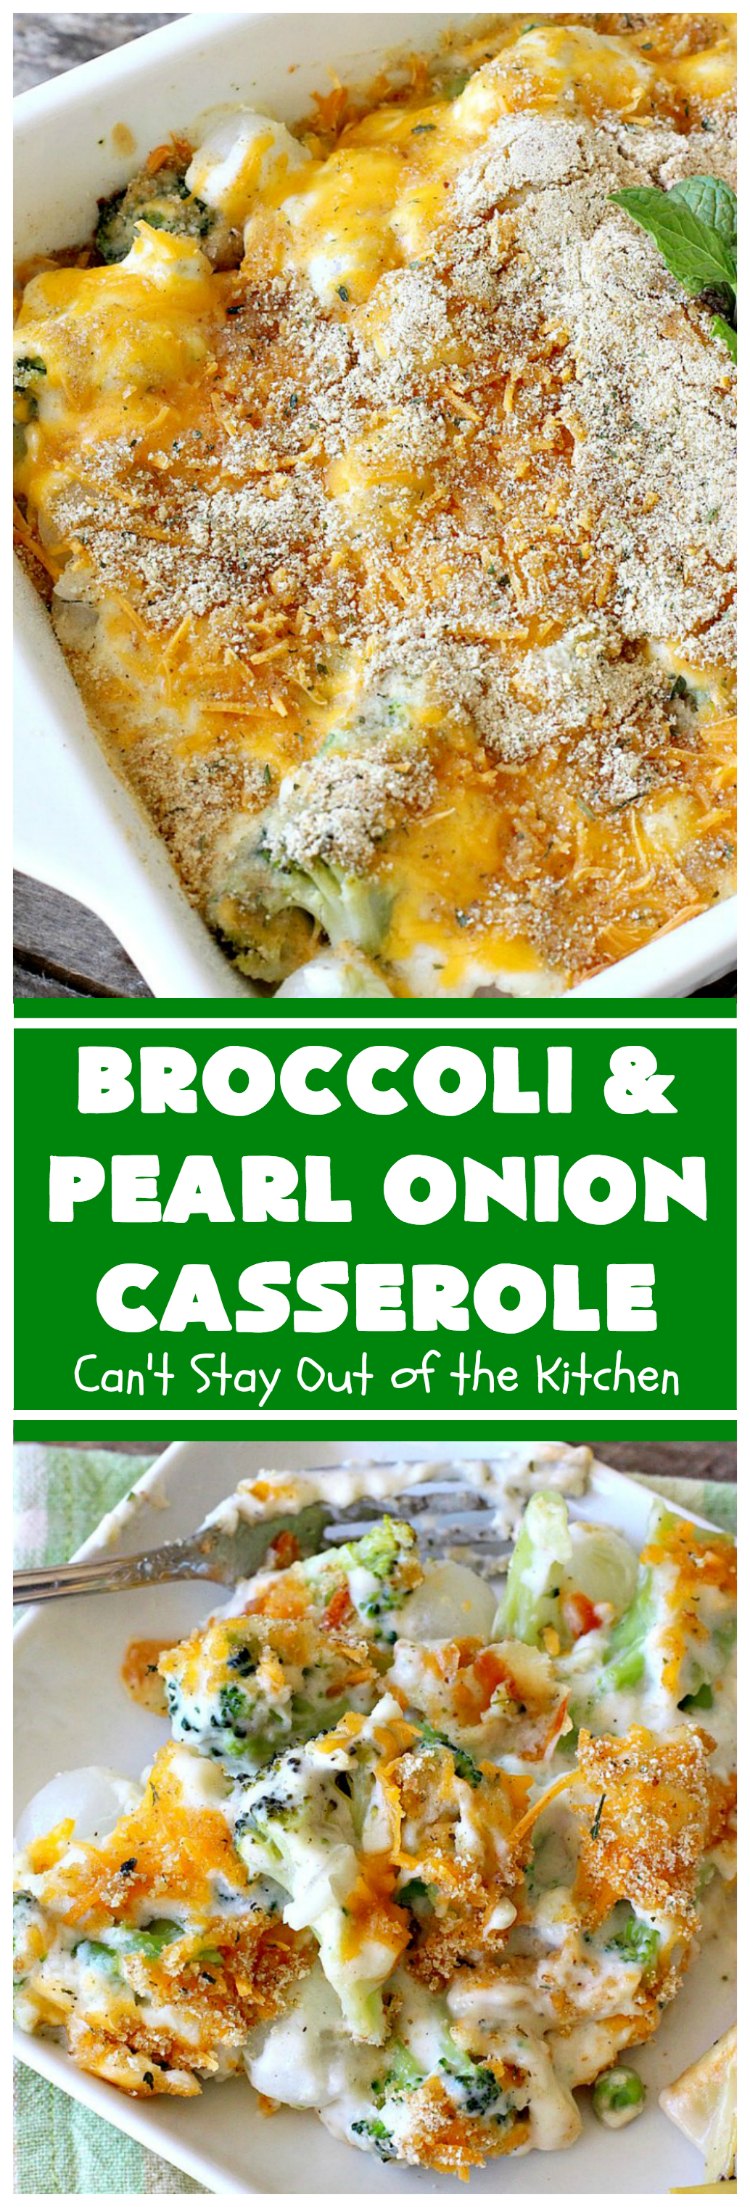 Broccoli and Pearl Onion Casserole | Can't Stay Out of the Kitchen